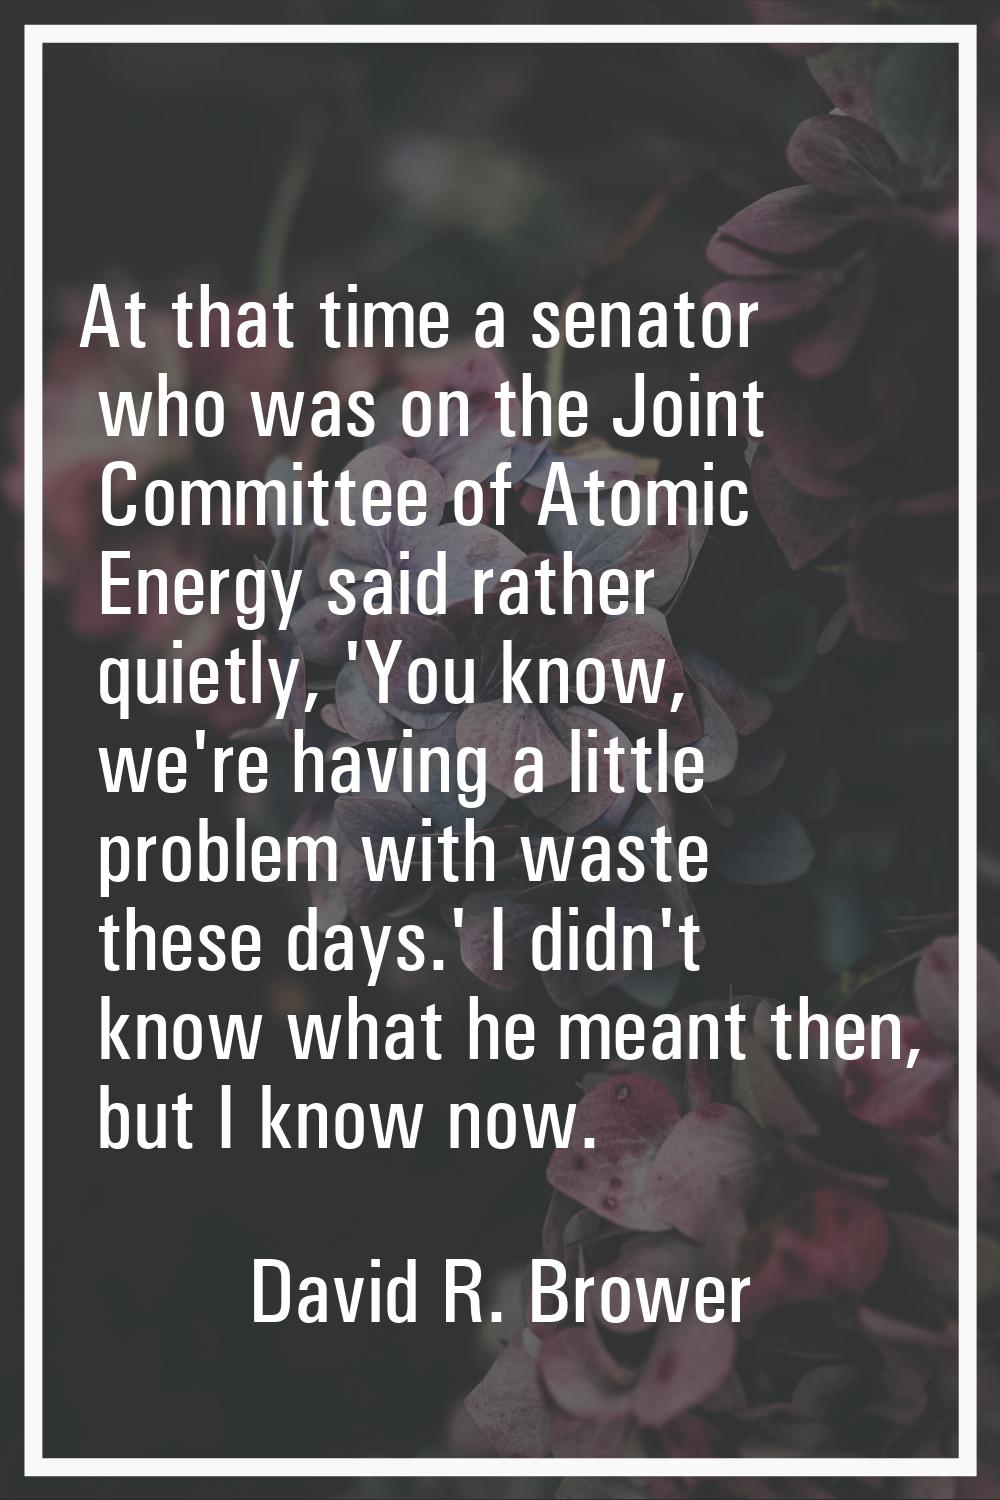 At that time a senator who was on the Joint Committee of Atomic Energy said rather quietly, 'You kn